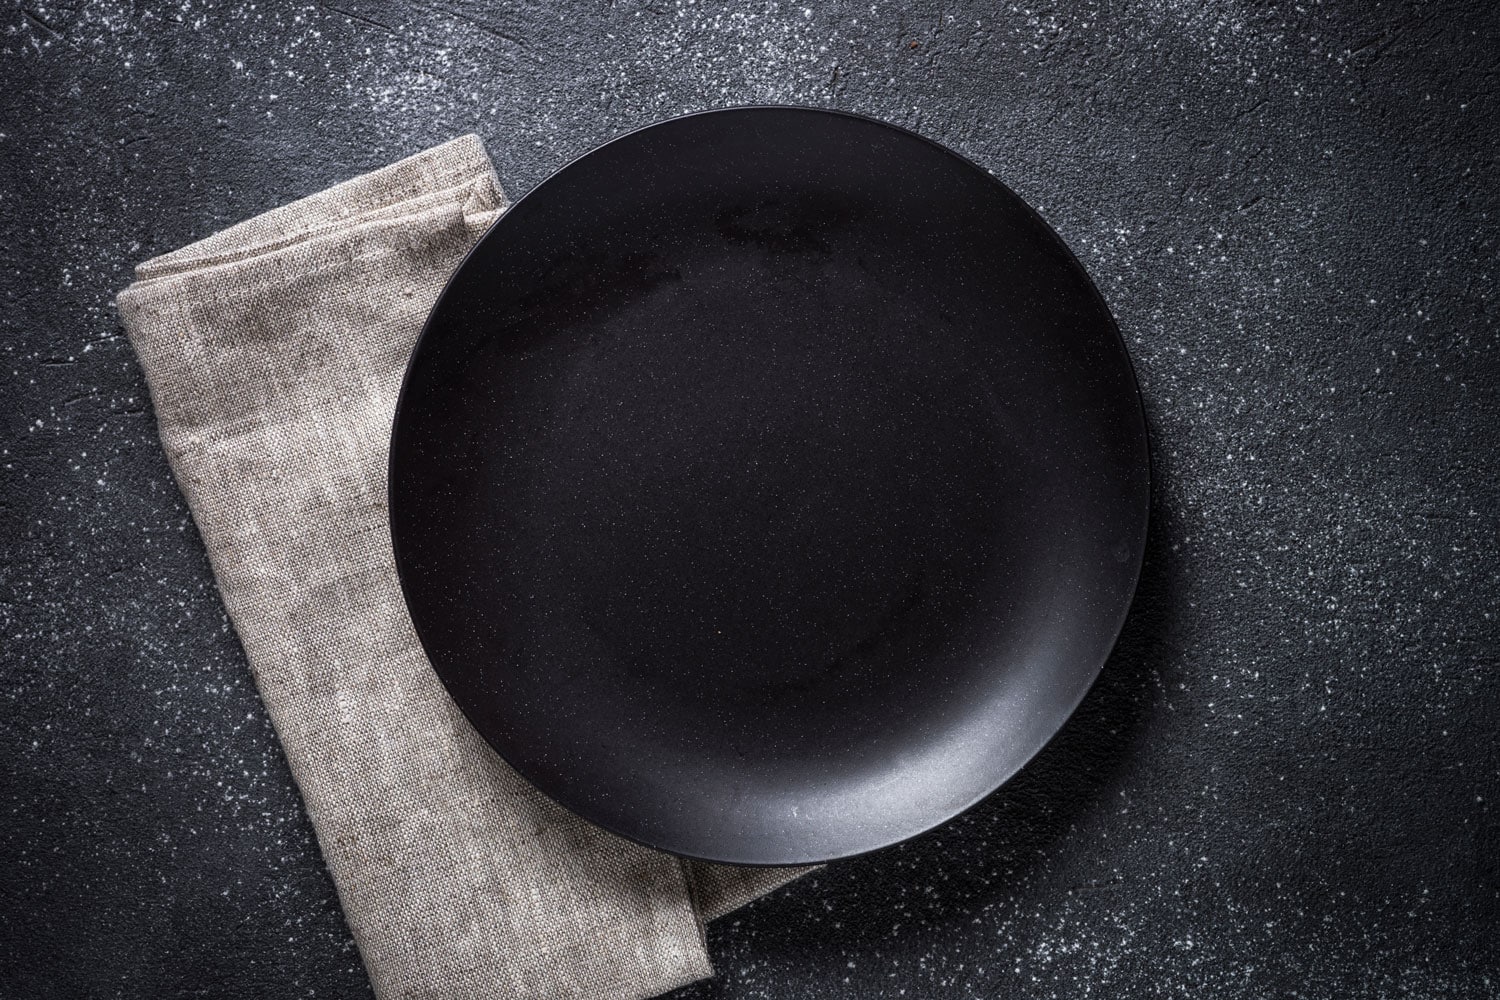 Black plate placed on the gray table